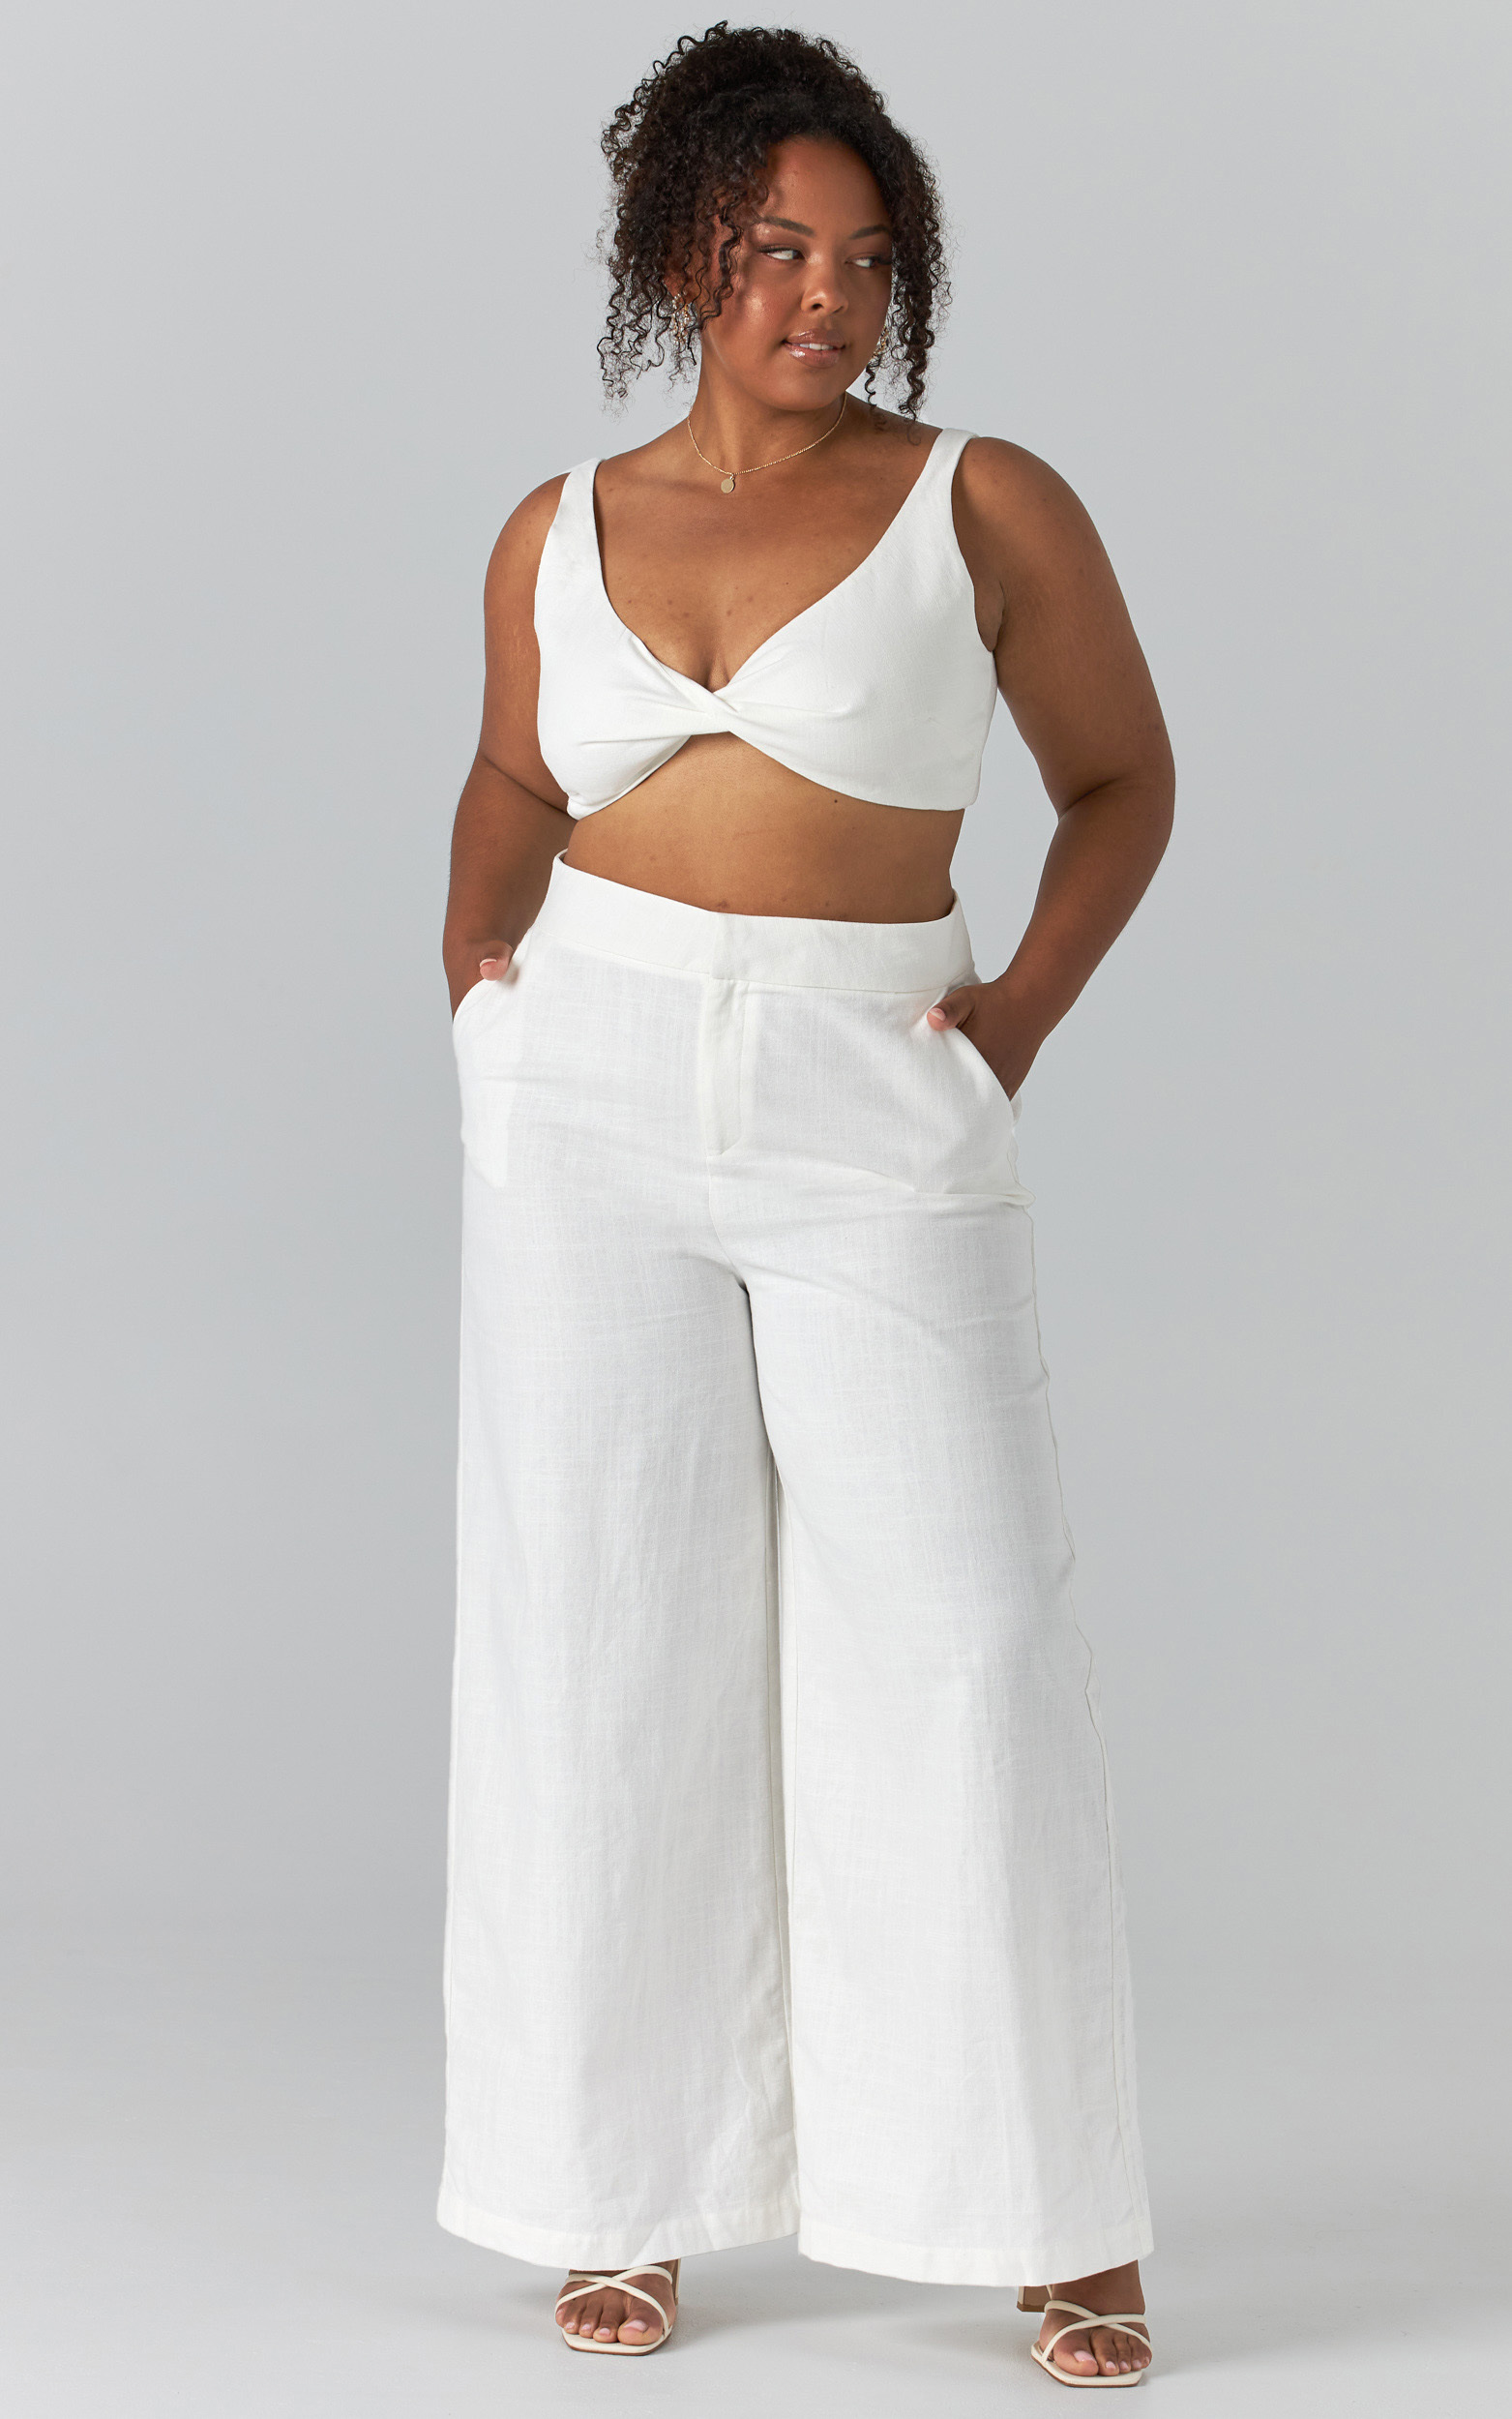 Kingston Twist Front Twill Two Piece Set in White - 04, WHT4, hi-res image number null